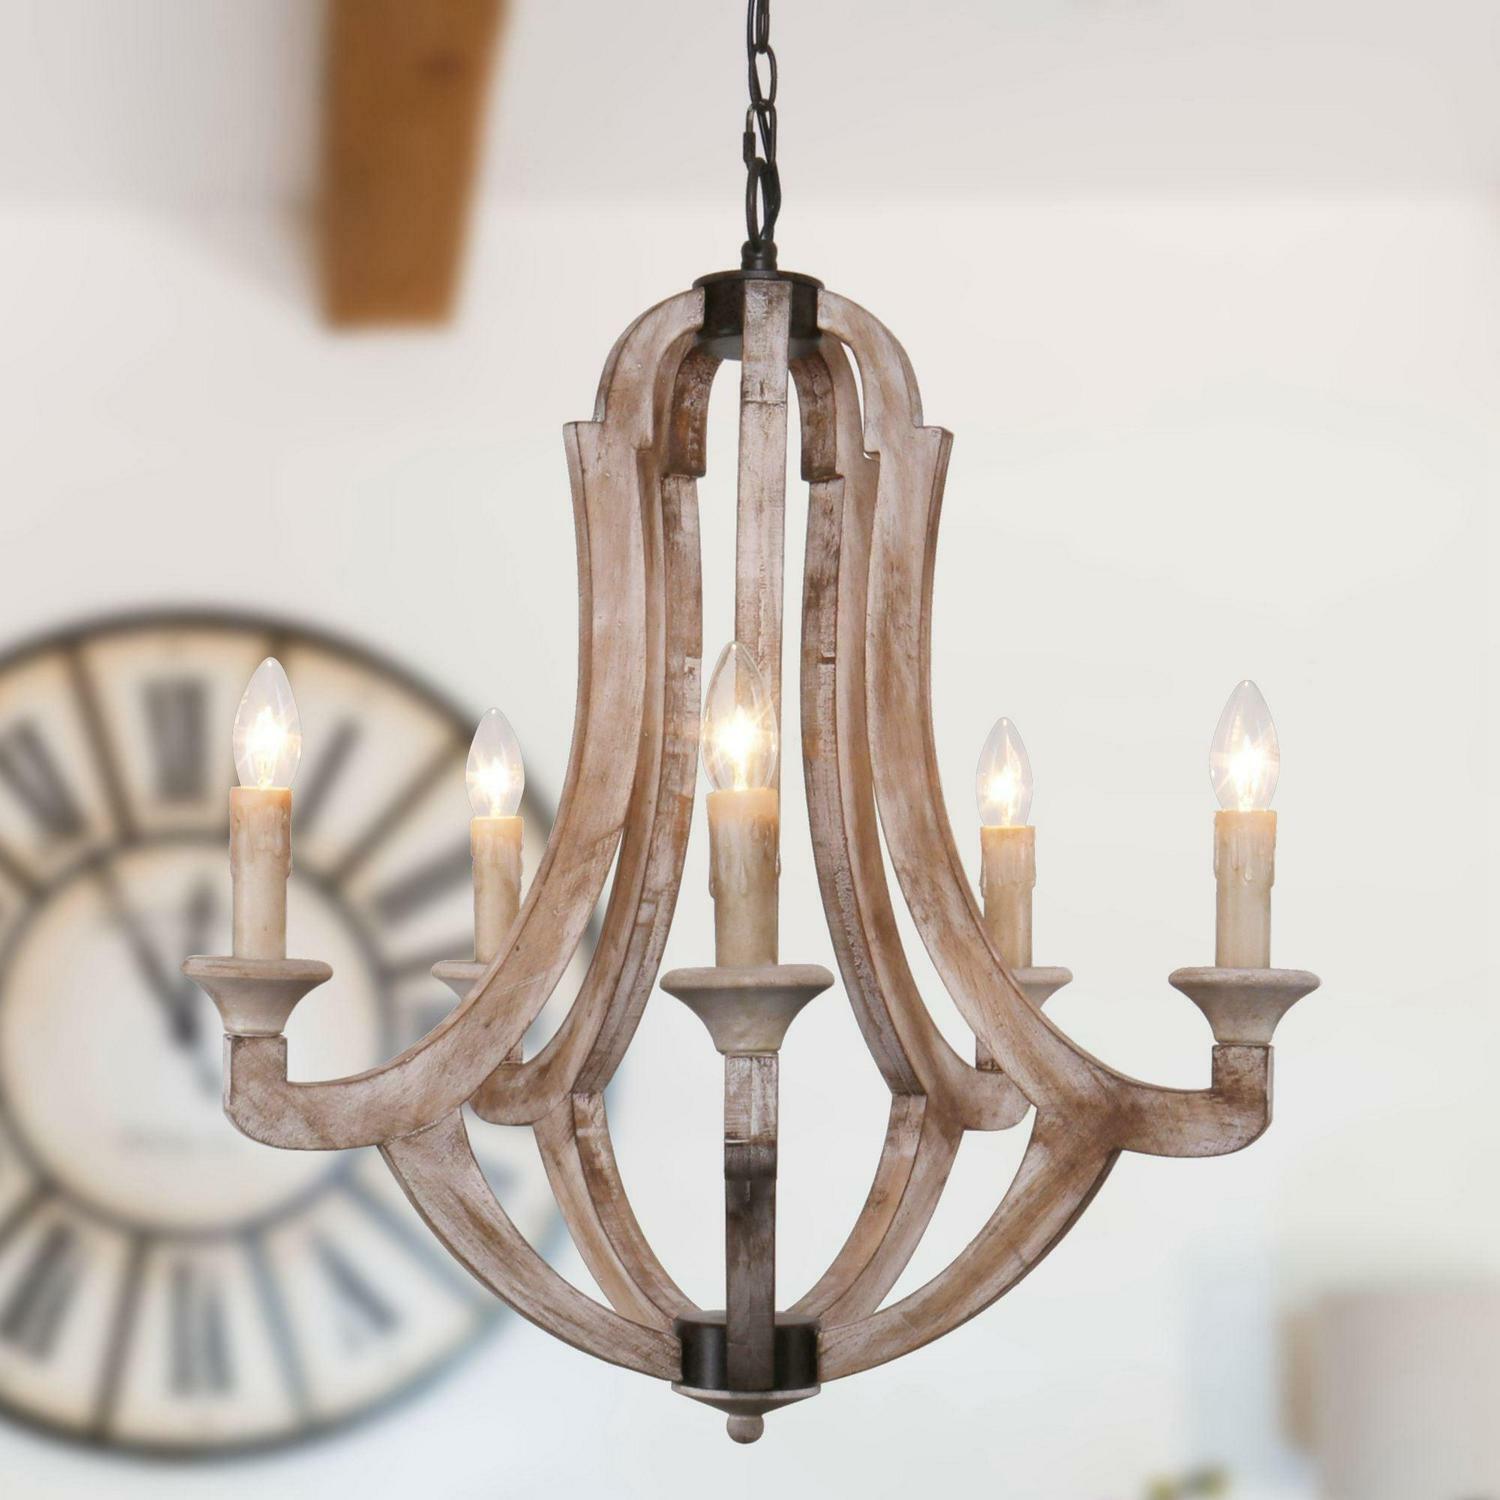 Distressed White 5-Light Wooden Candle Chandelier